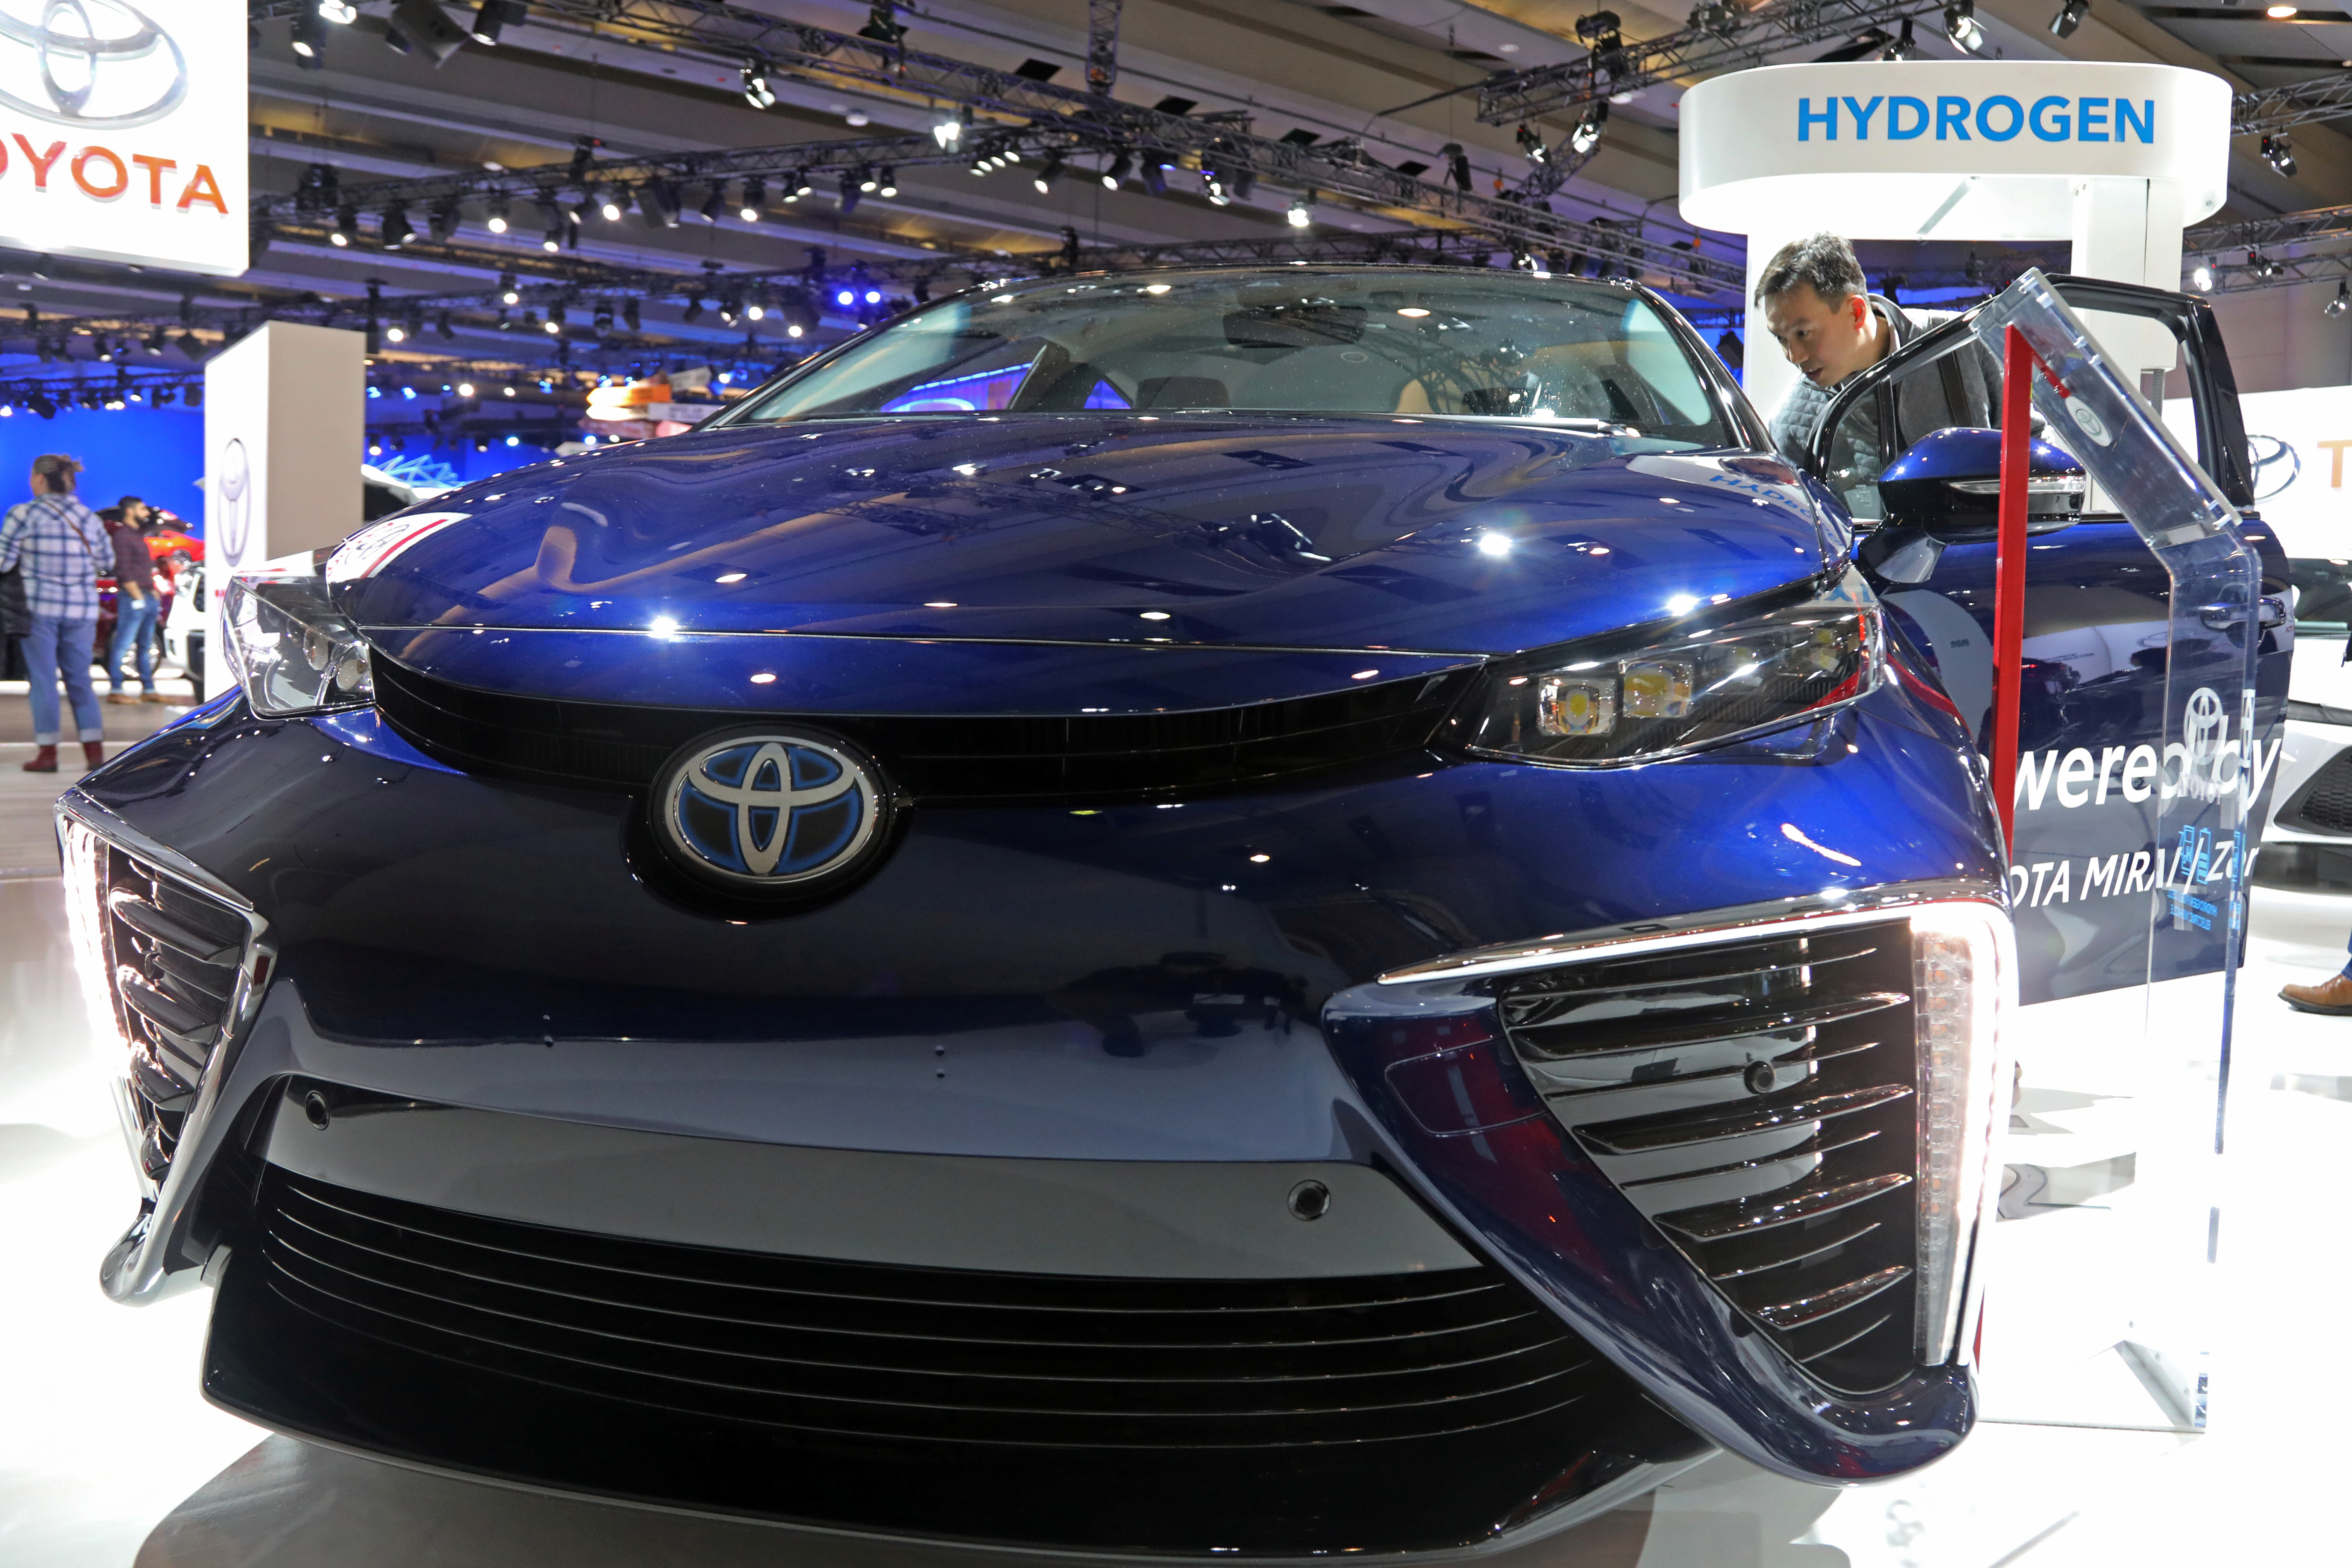 FILE PHOTO - A 2020 Toyota Mirai hydrogen electric fuel cell car is displayed at the Canadian International Auto Show in Toronto